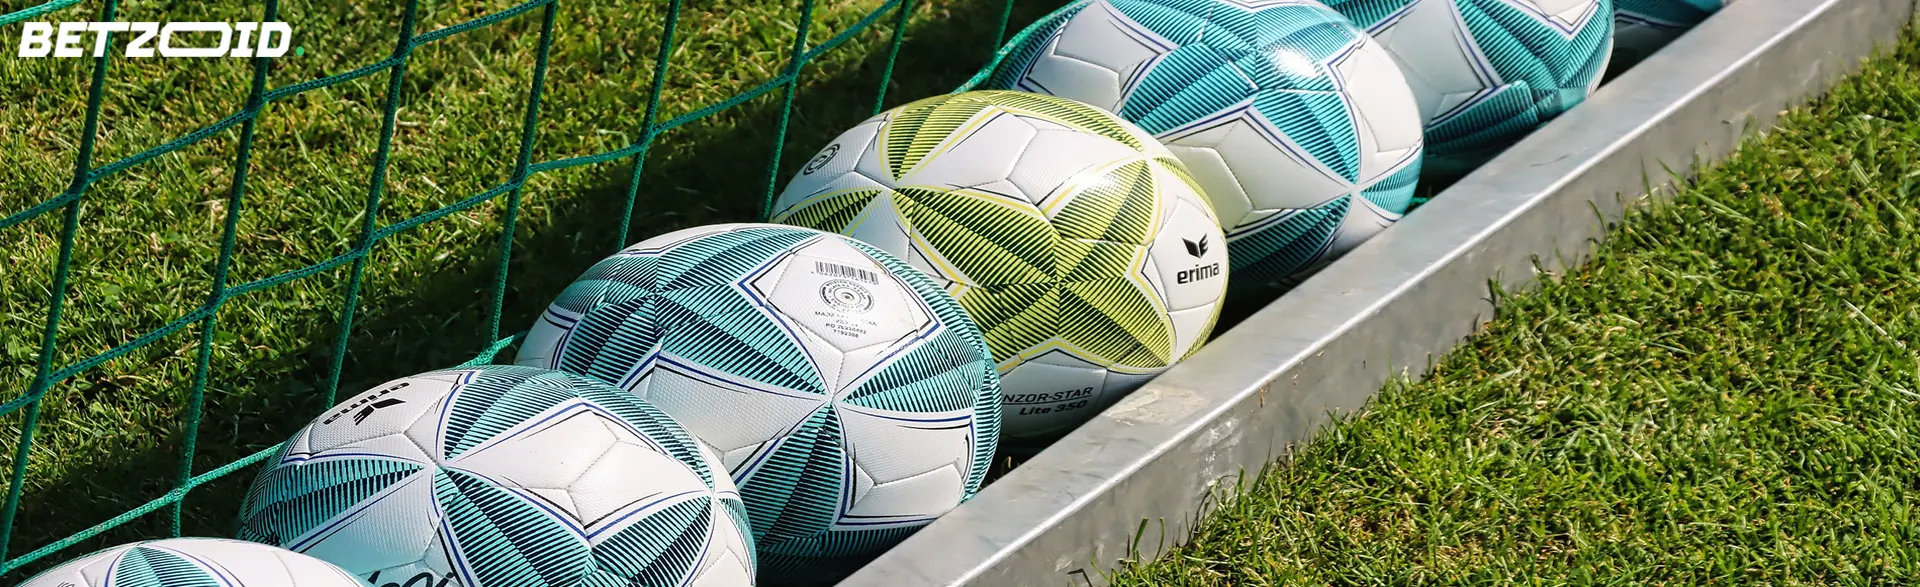 Soccer balls lined up in a goal, ready for action on anonymous betting sites in Australia.